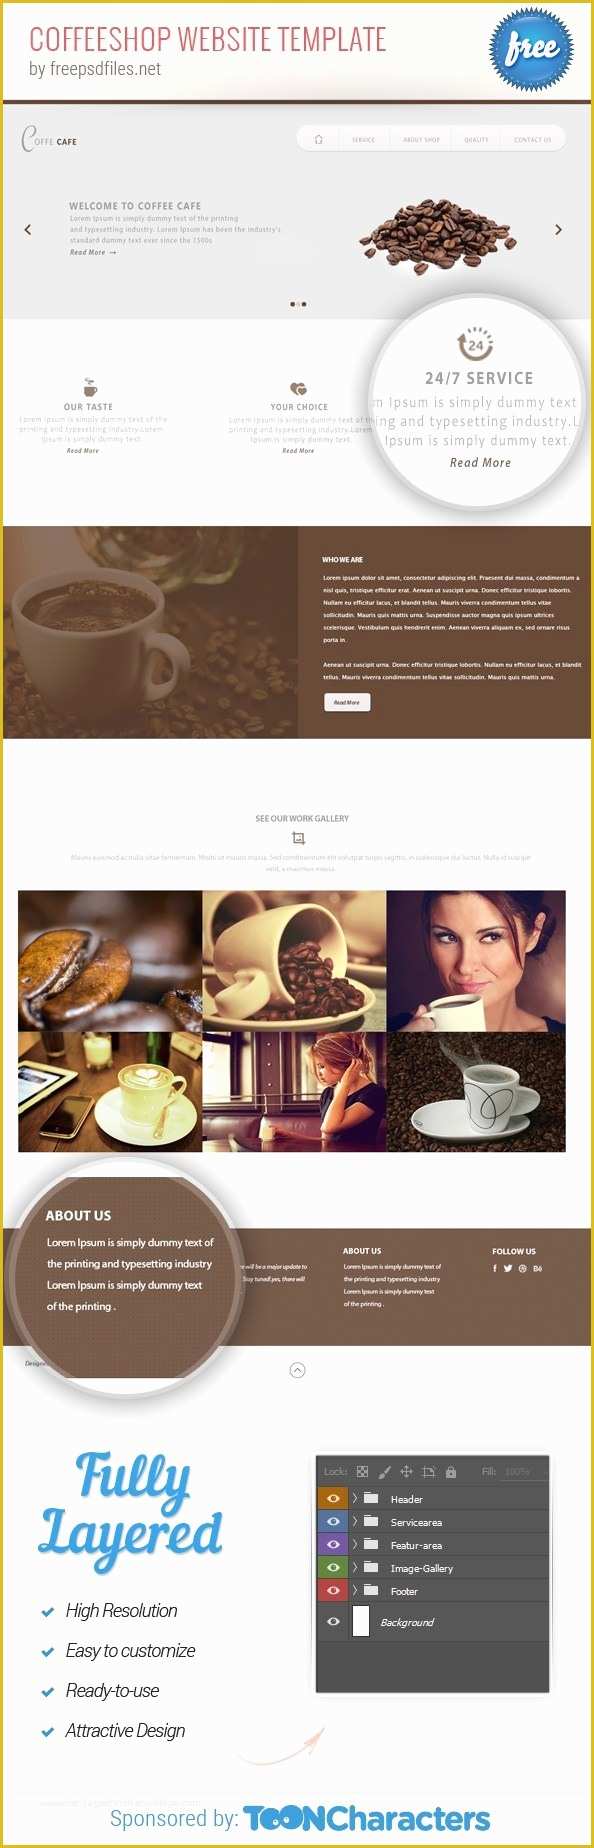 Coffee Shop Website Template Free Of Free Psd Coffeeshop Website Template Free Psd Files